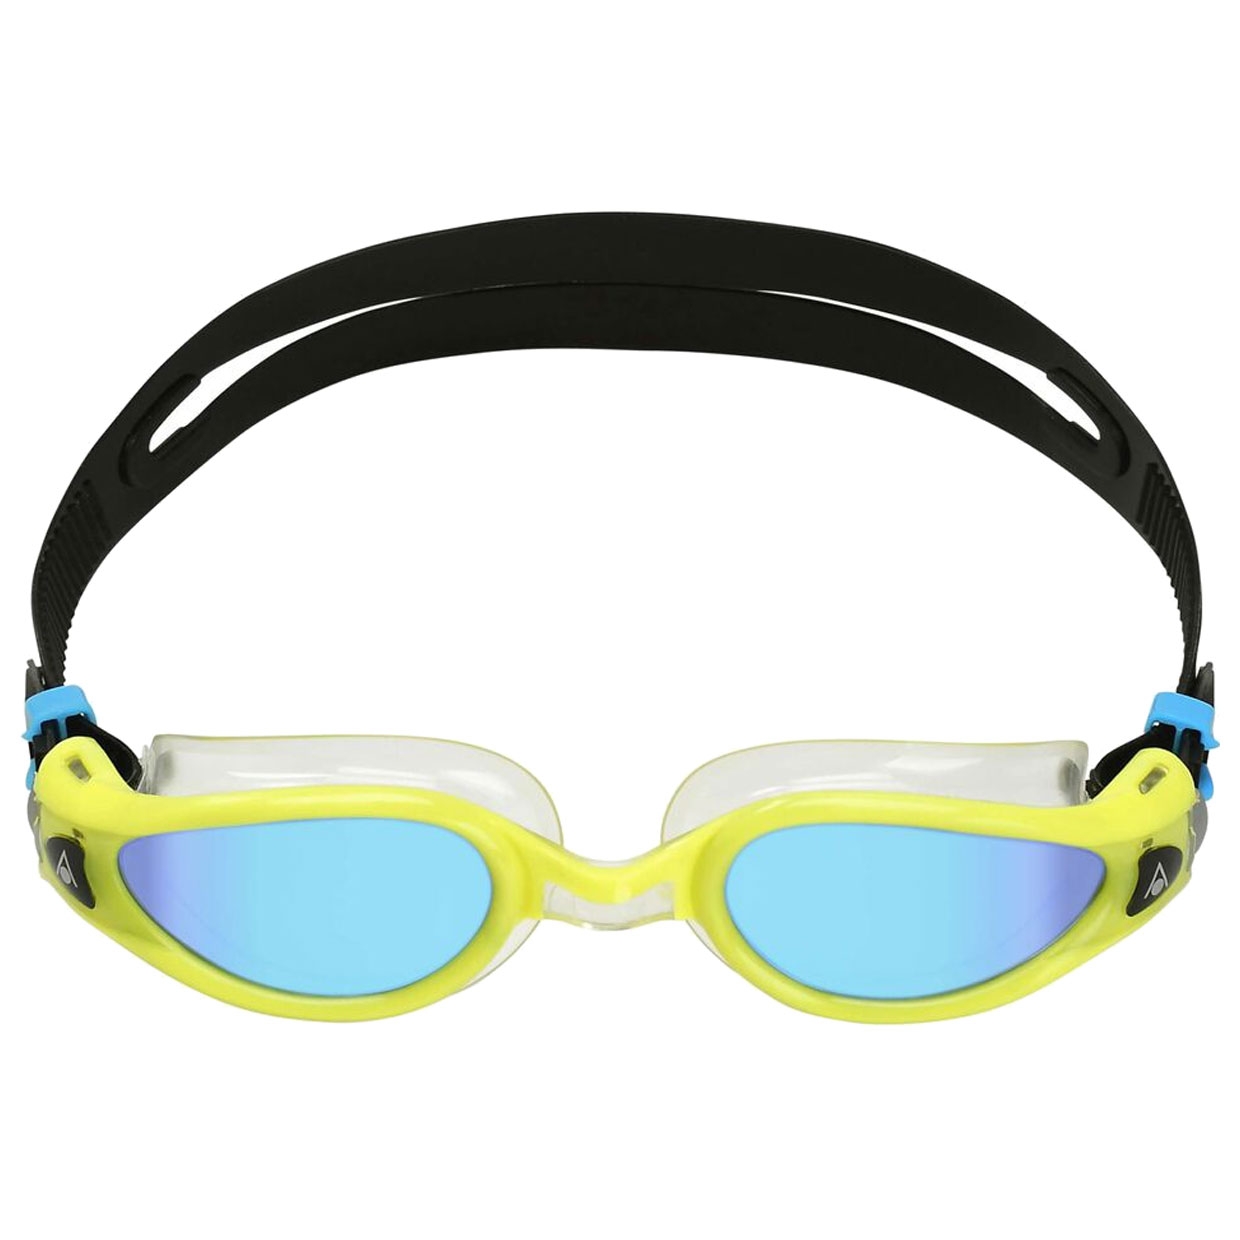 Schwimmbrille Kaiman Exo Advanced Fit